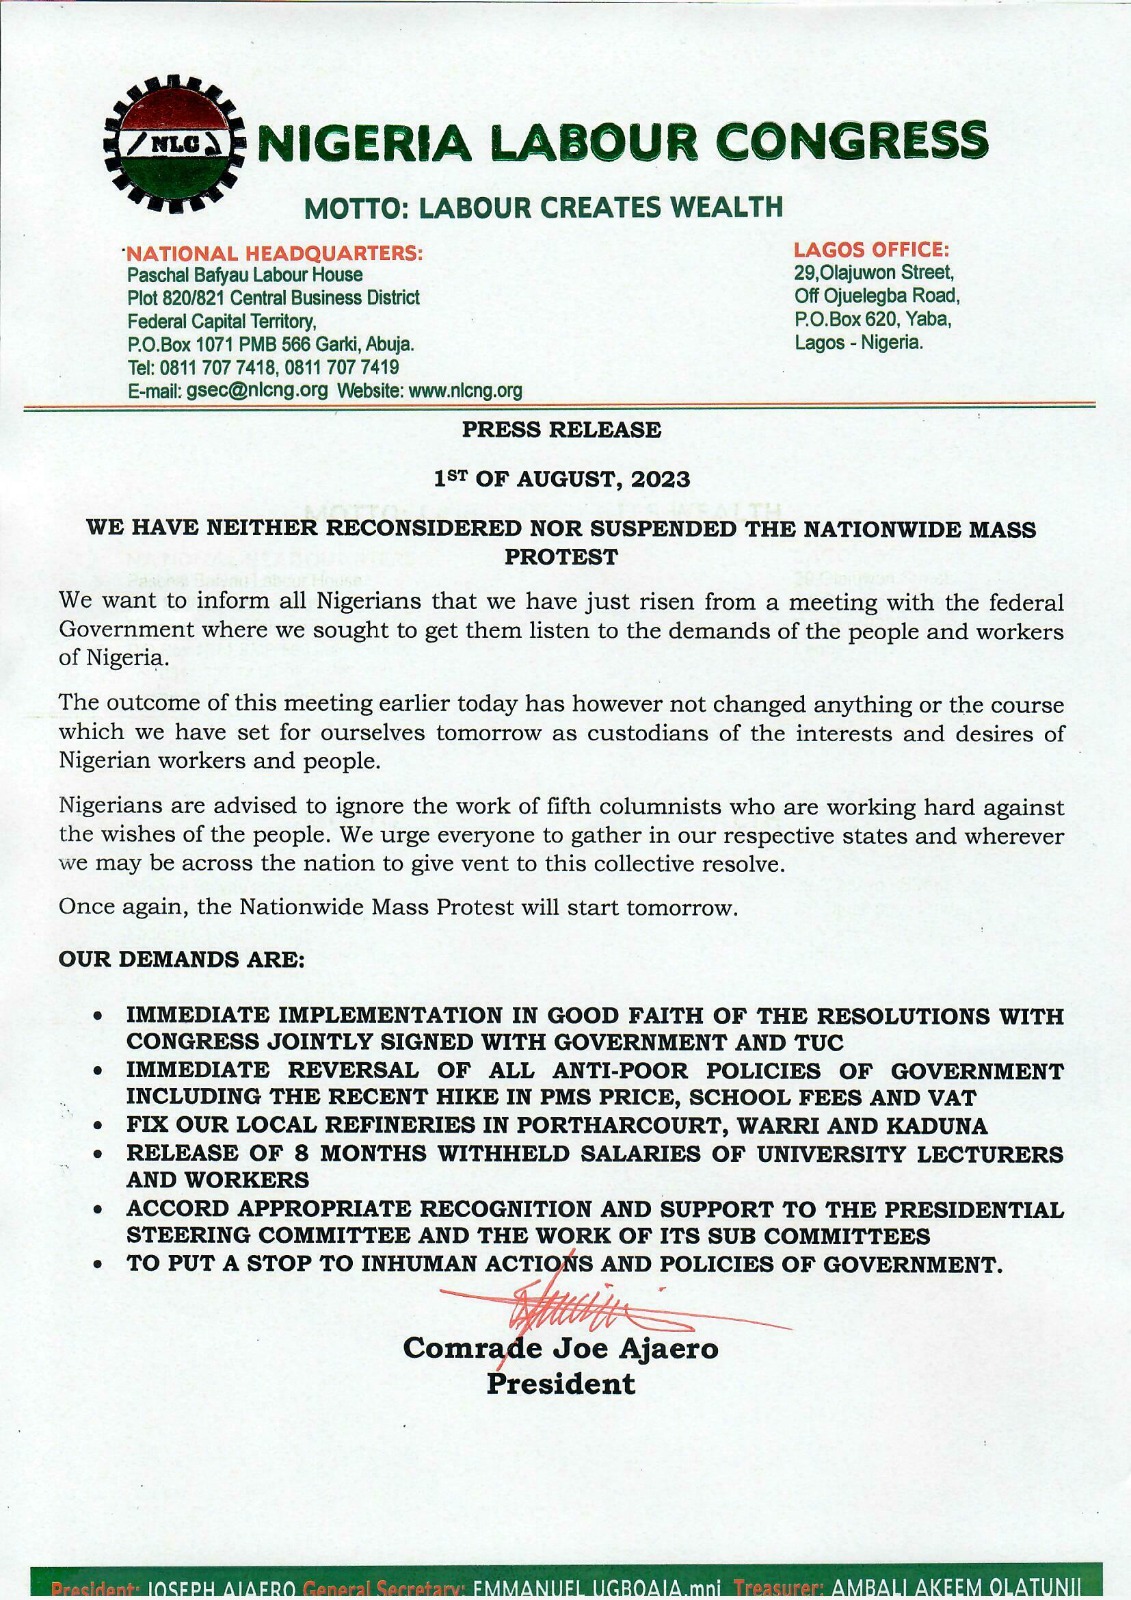 NLC denies reports it has postponed tomorrow?s nationwide protest